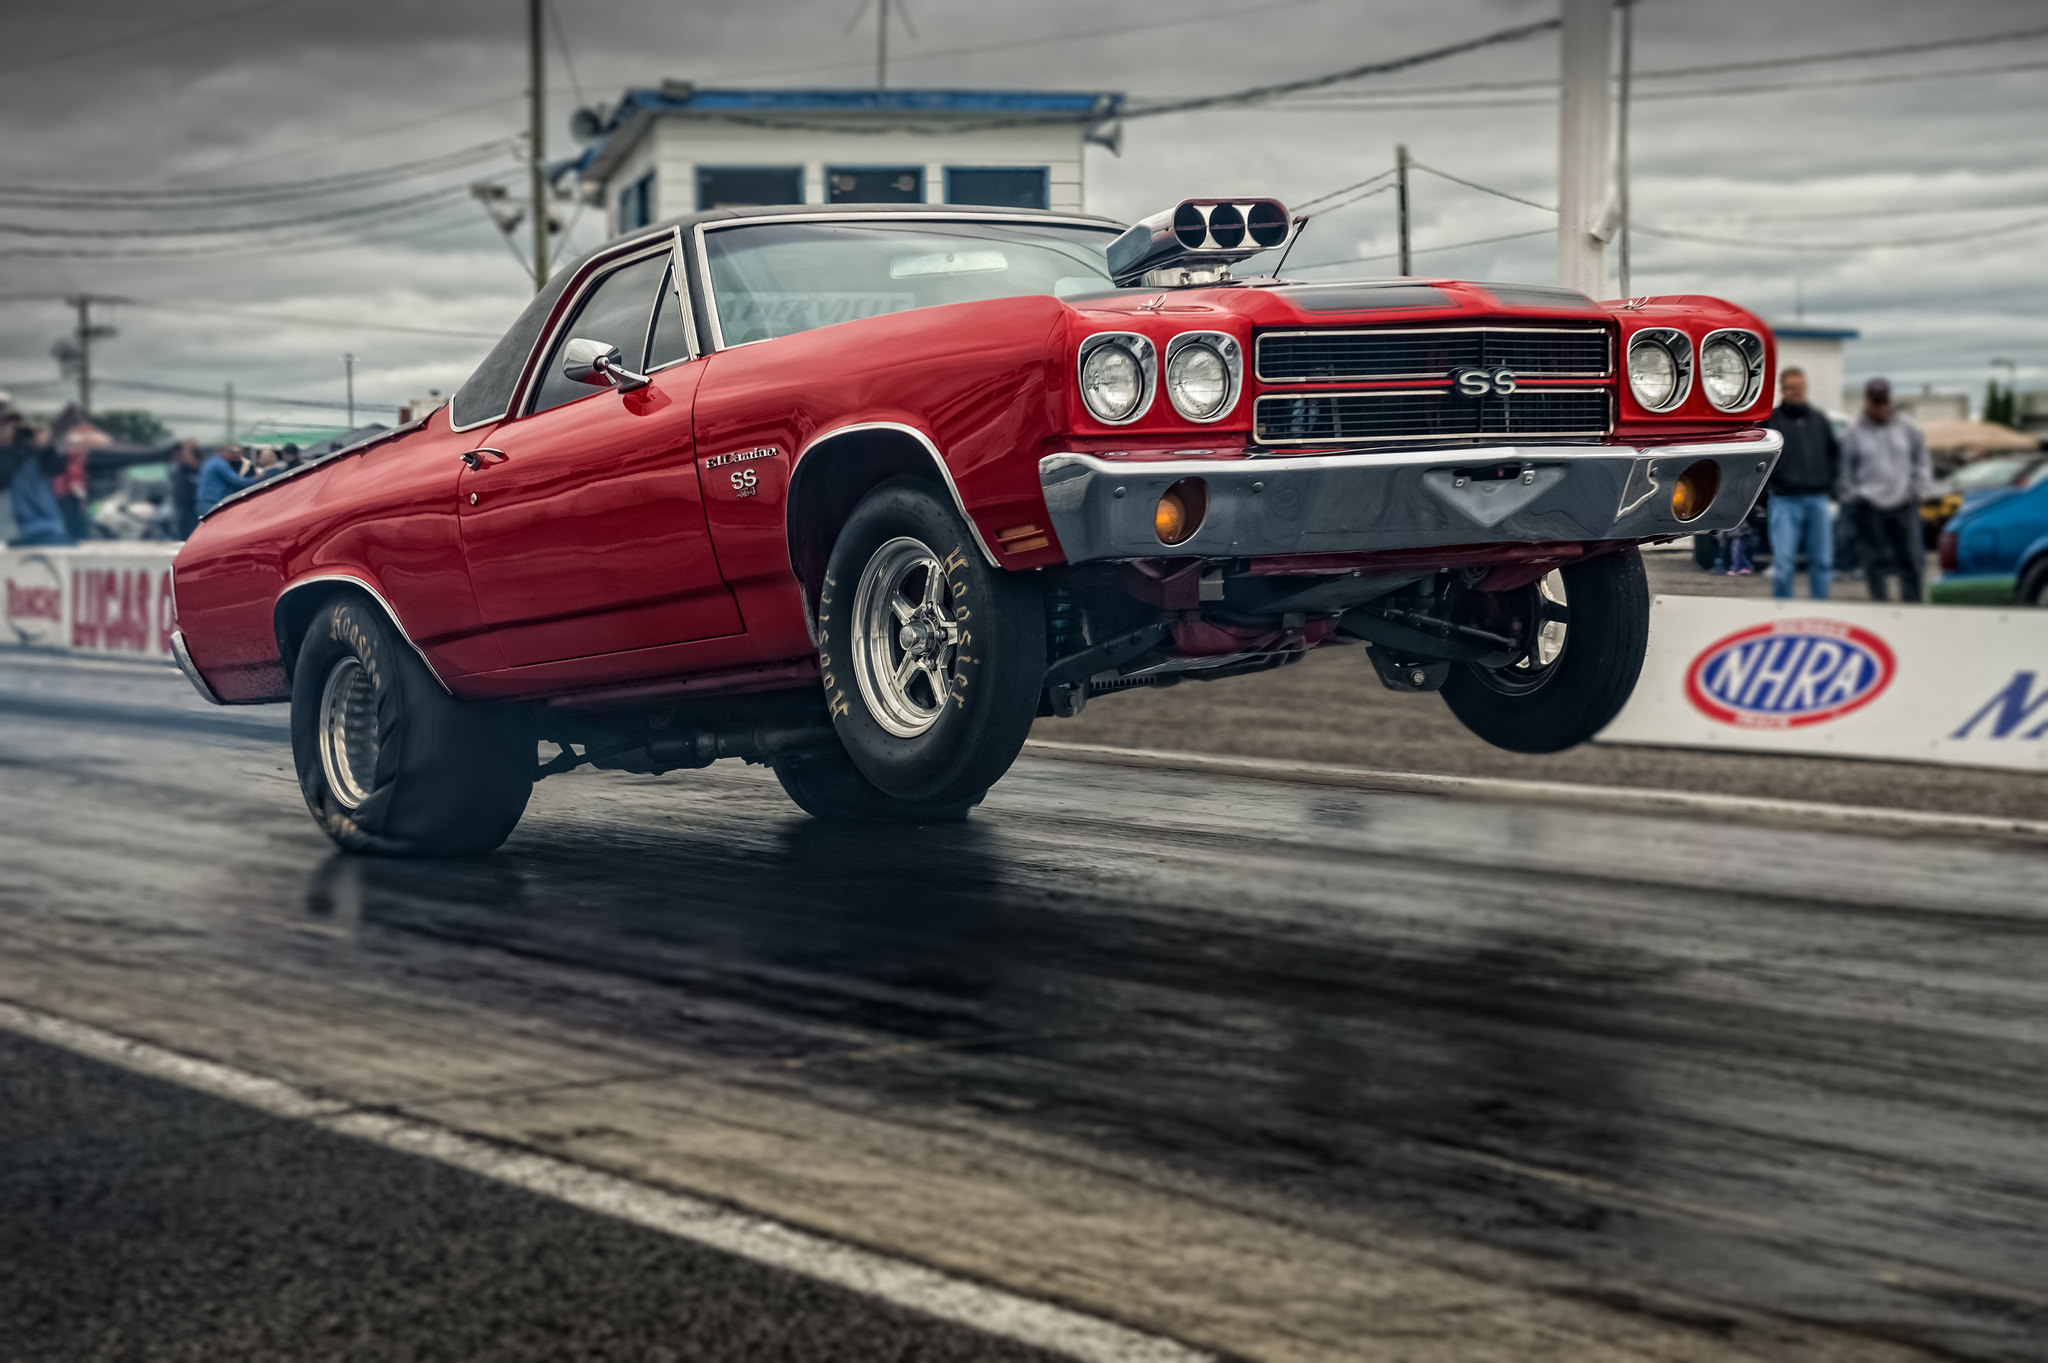 Download wallpaper chevrolet, el camino, ss, muscle car, muscle